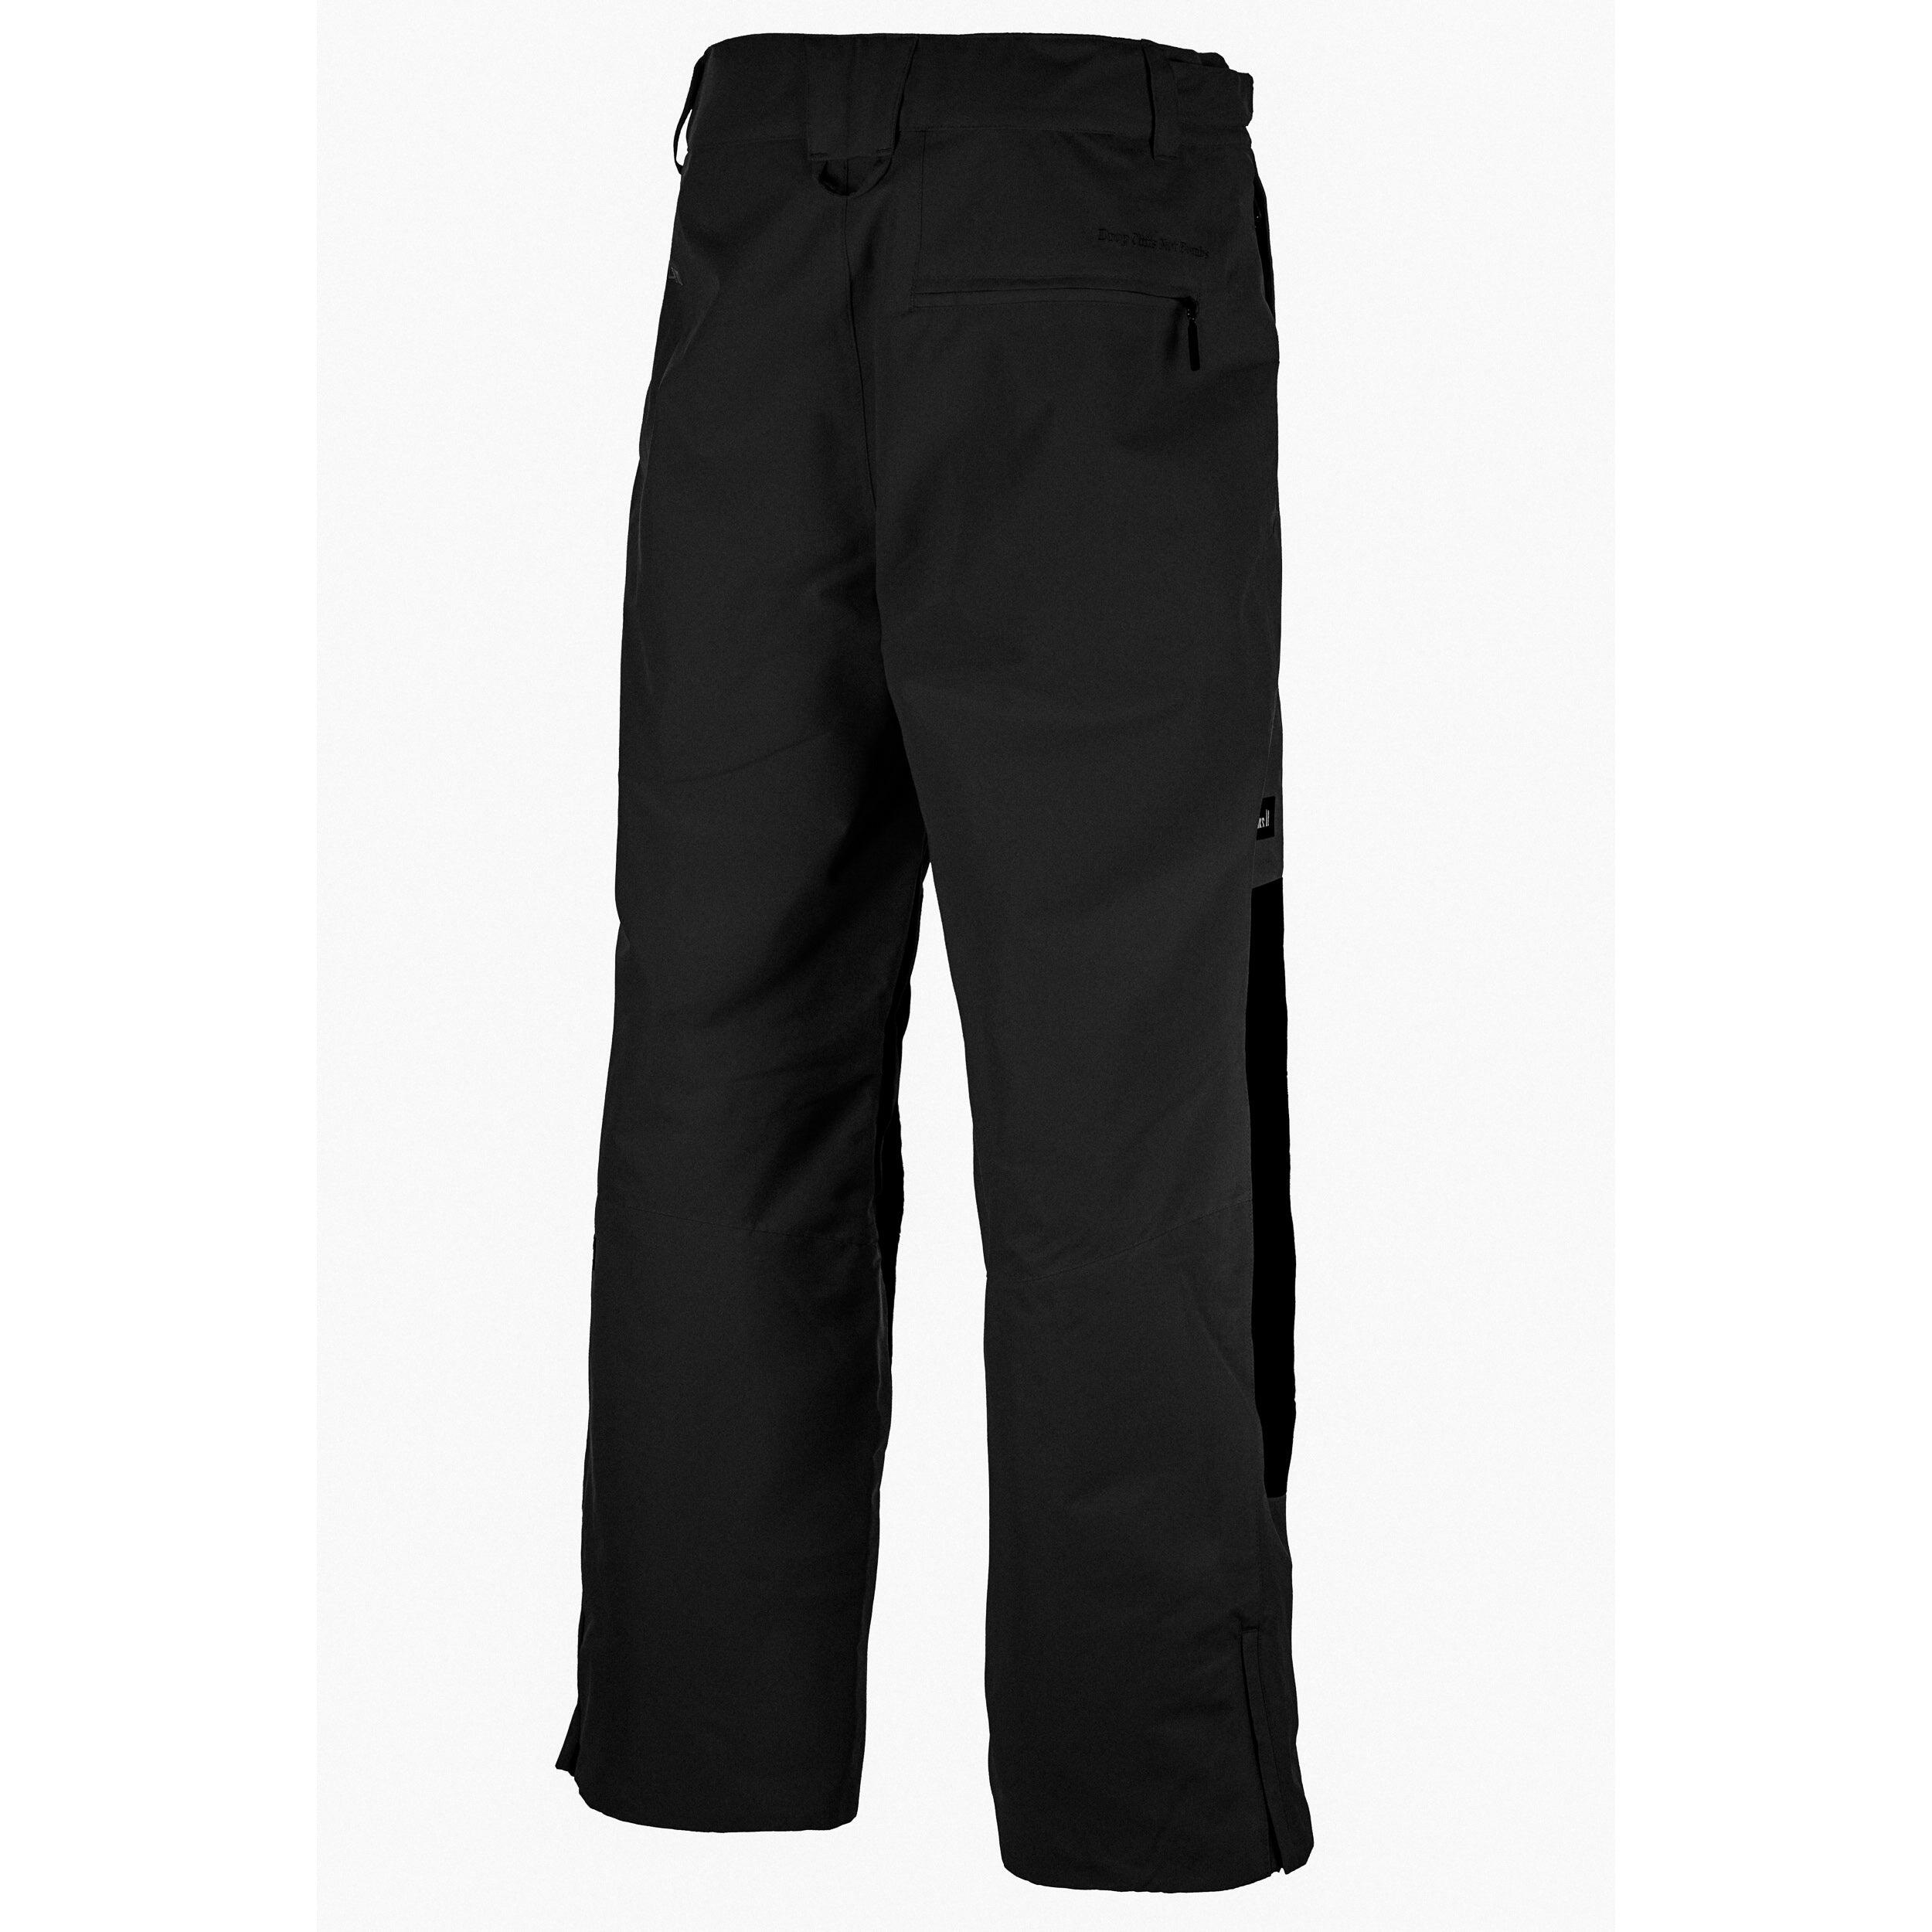 Planks Easy Rider Men's Ski Pants in Black with Pockets - Breathable Trousers 6/6